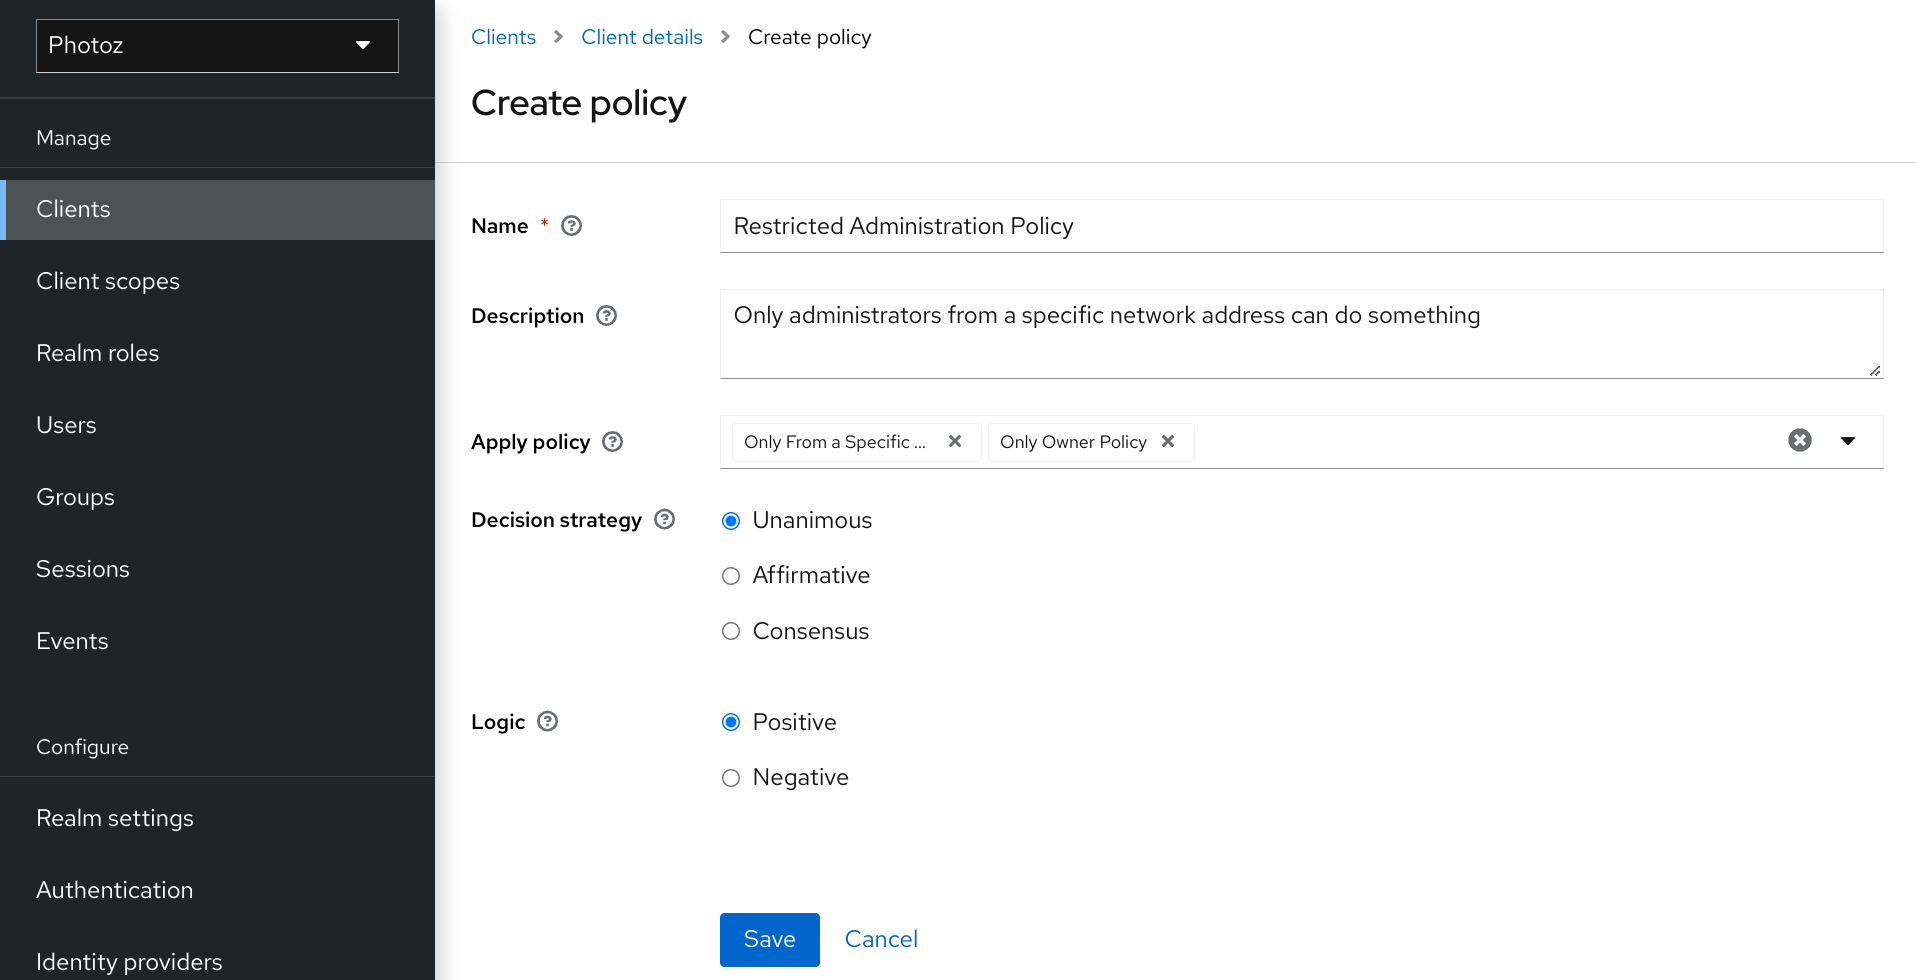 Add aggregated policy